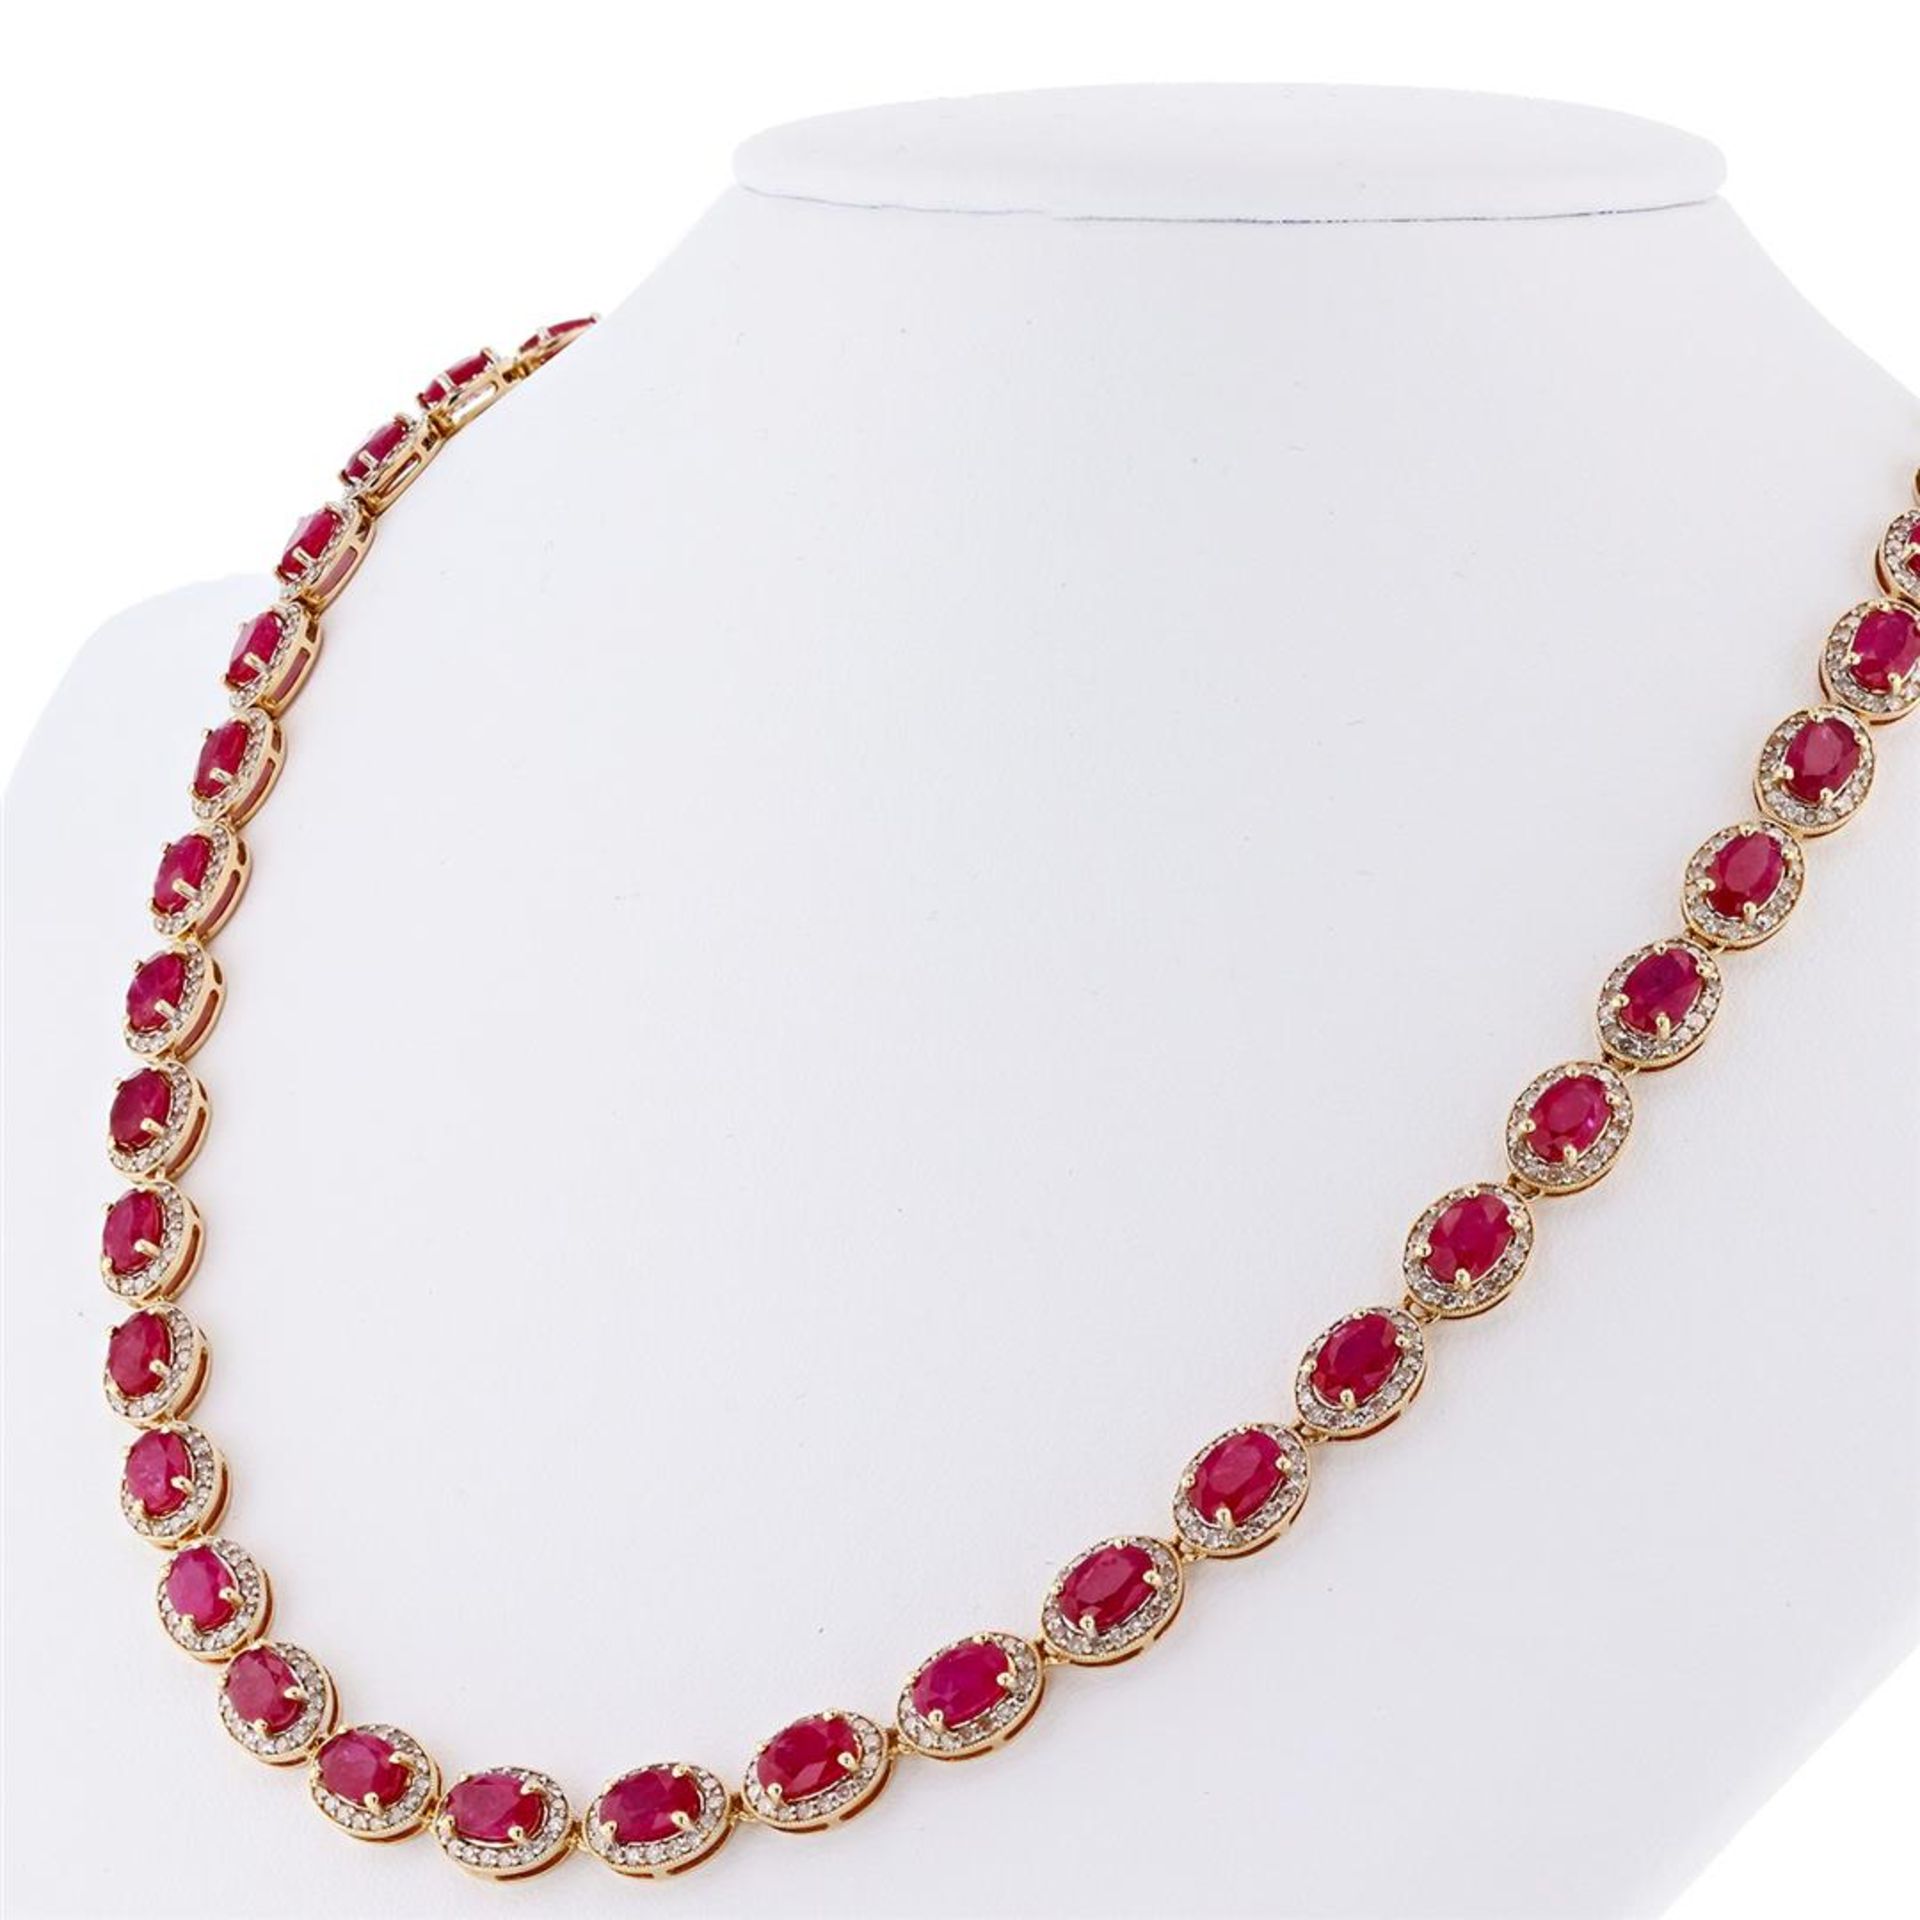 24.87 ctw Ruby and 4.38 ctw Diamond 14K Yellow Gold Necklace - Image 2 of 4